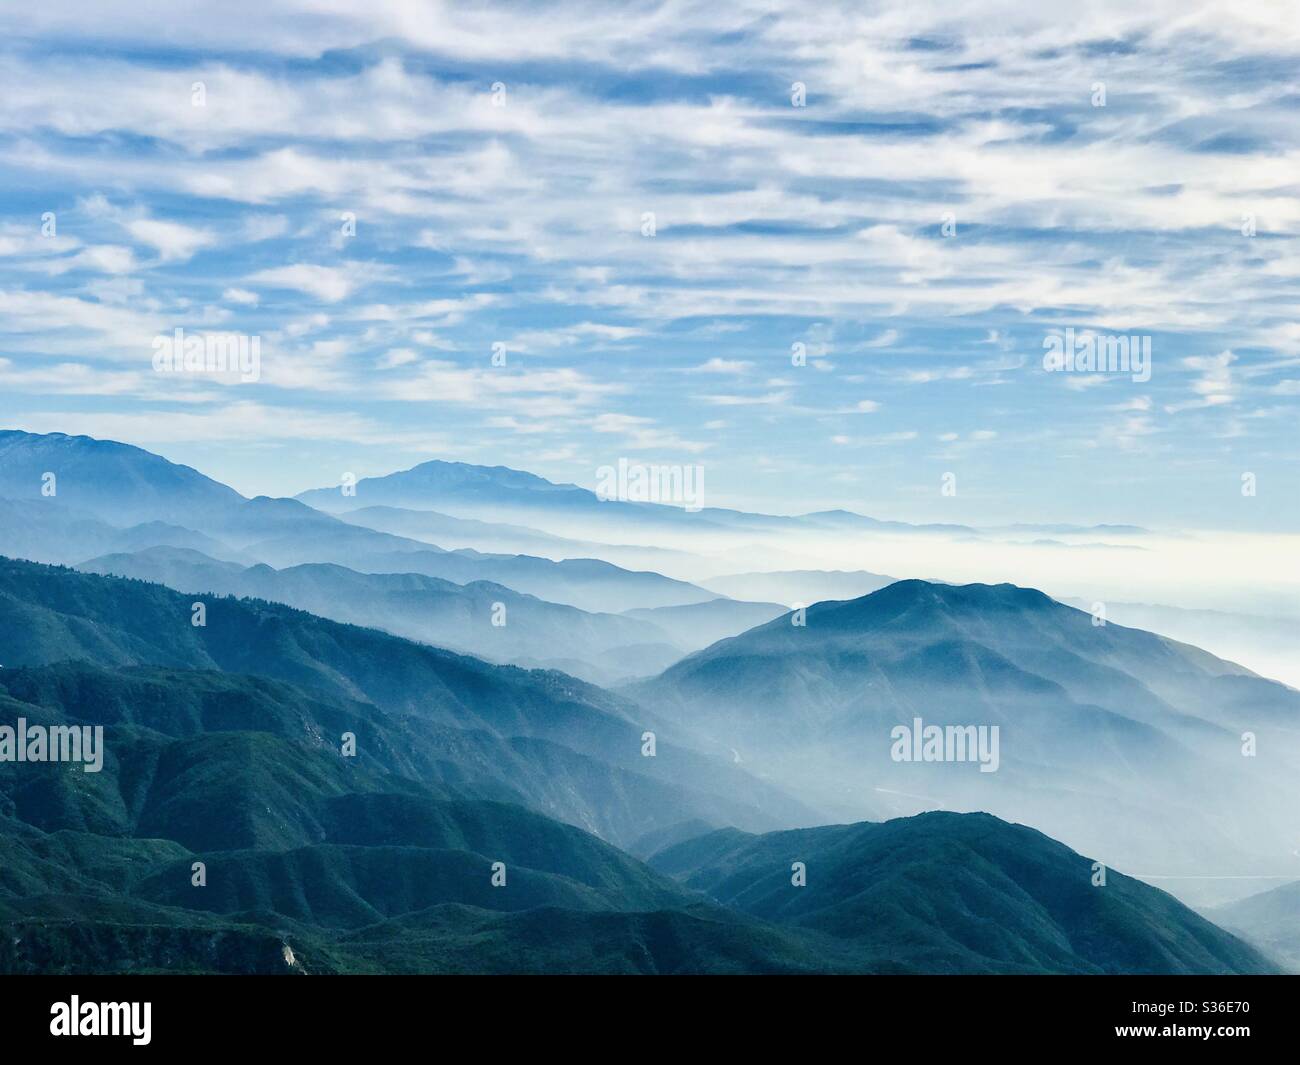 A scenic overview of layered mountains with a cloudy layer throughout under and cloud filled blue sky. Stock Photo